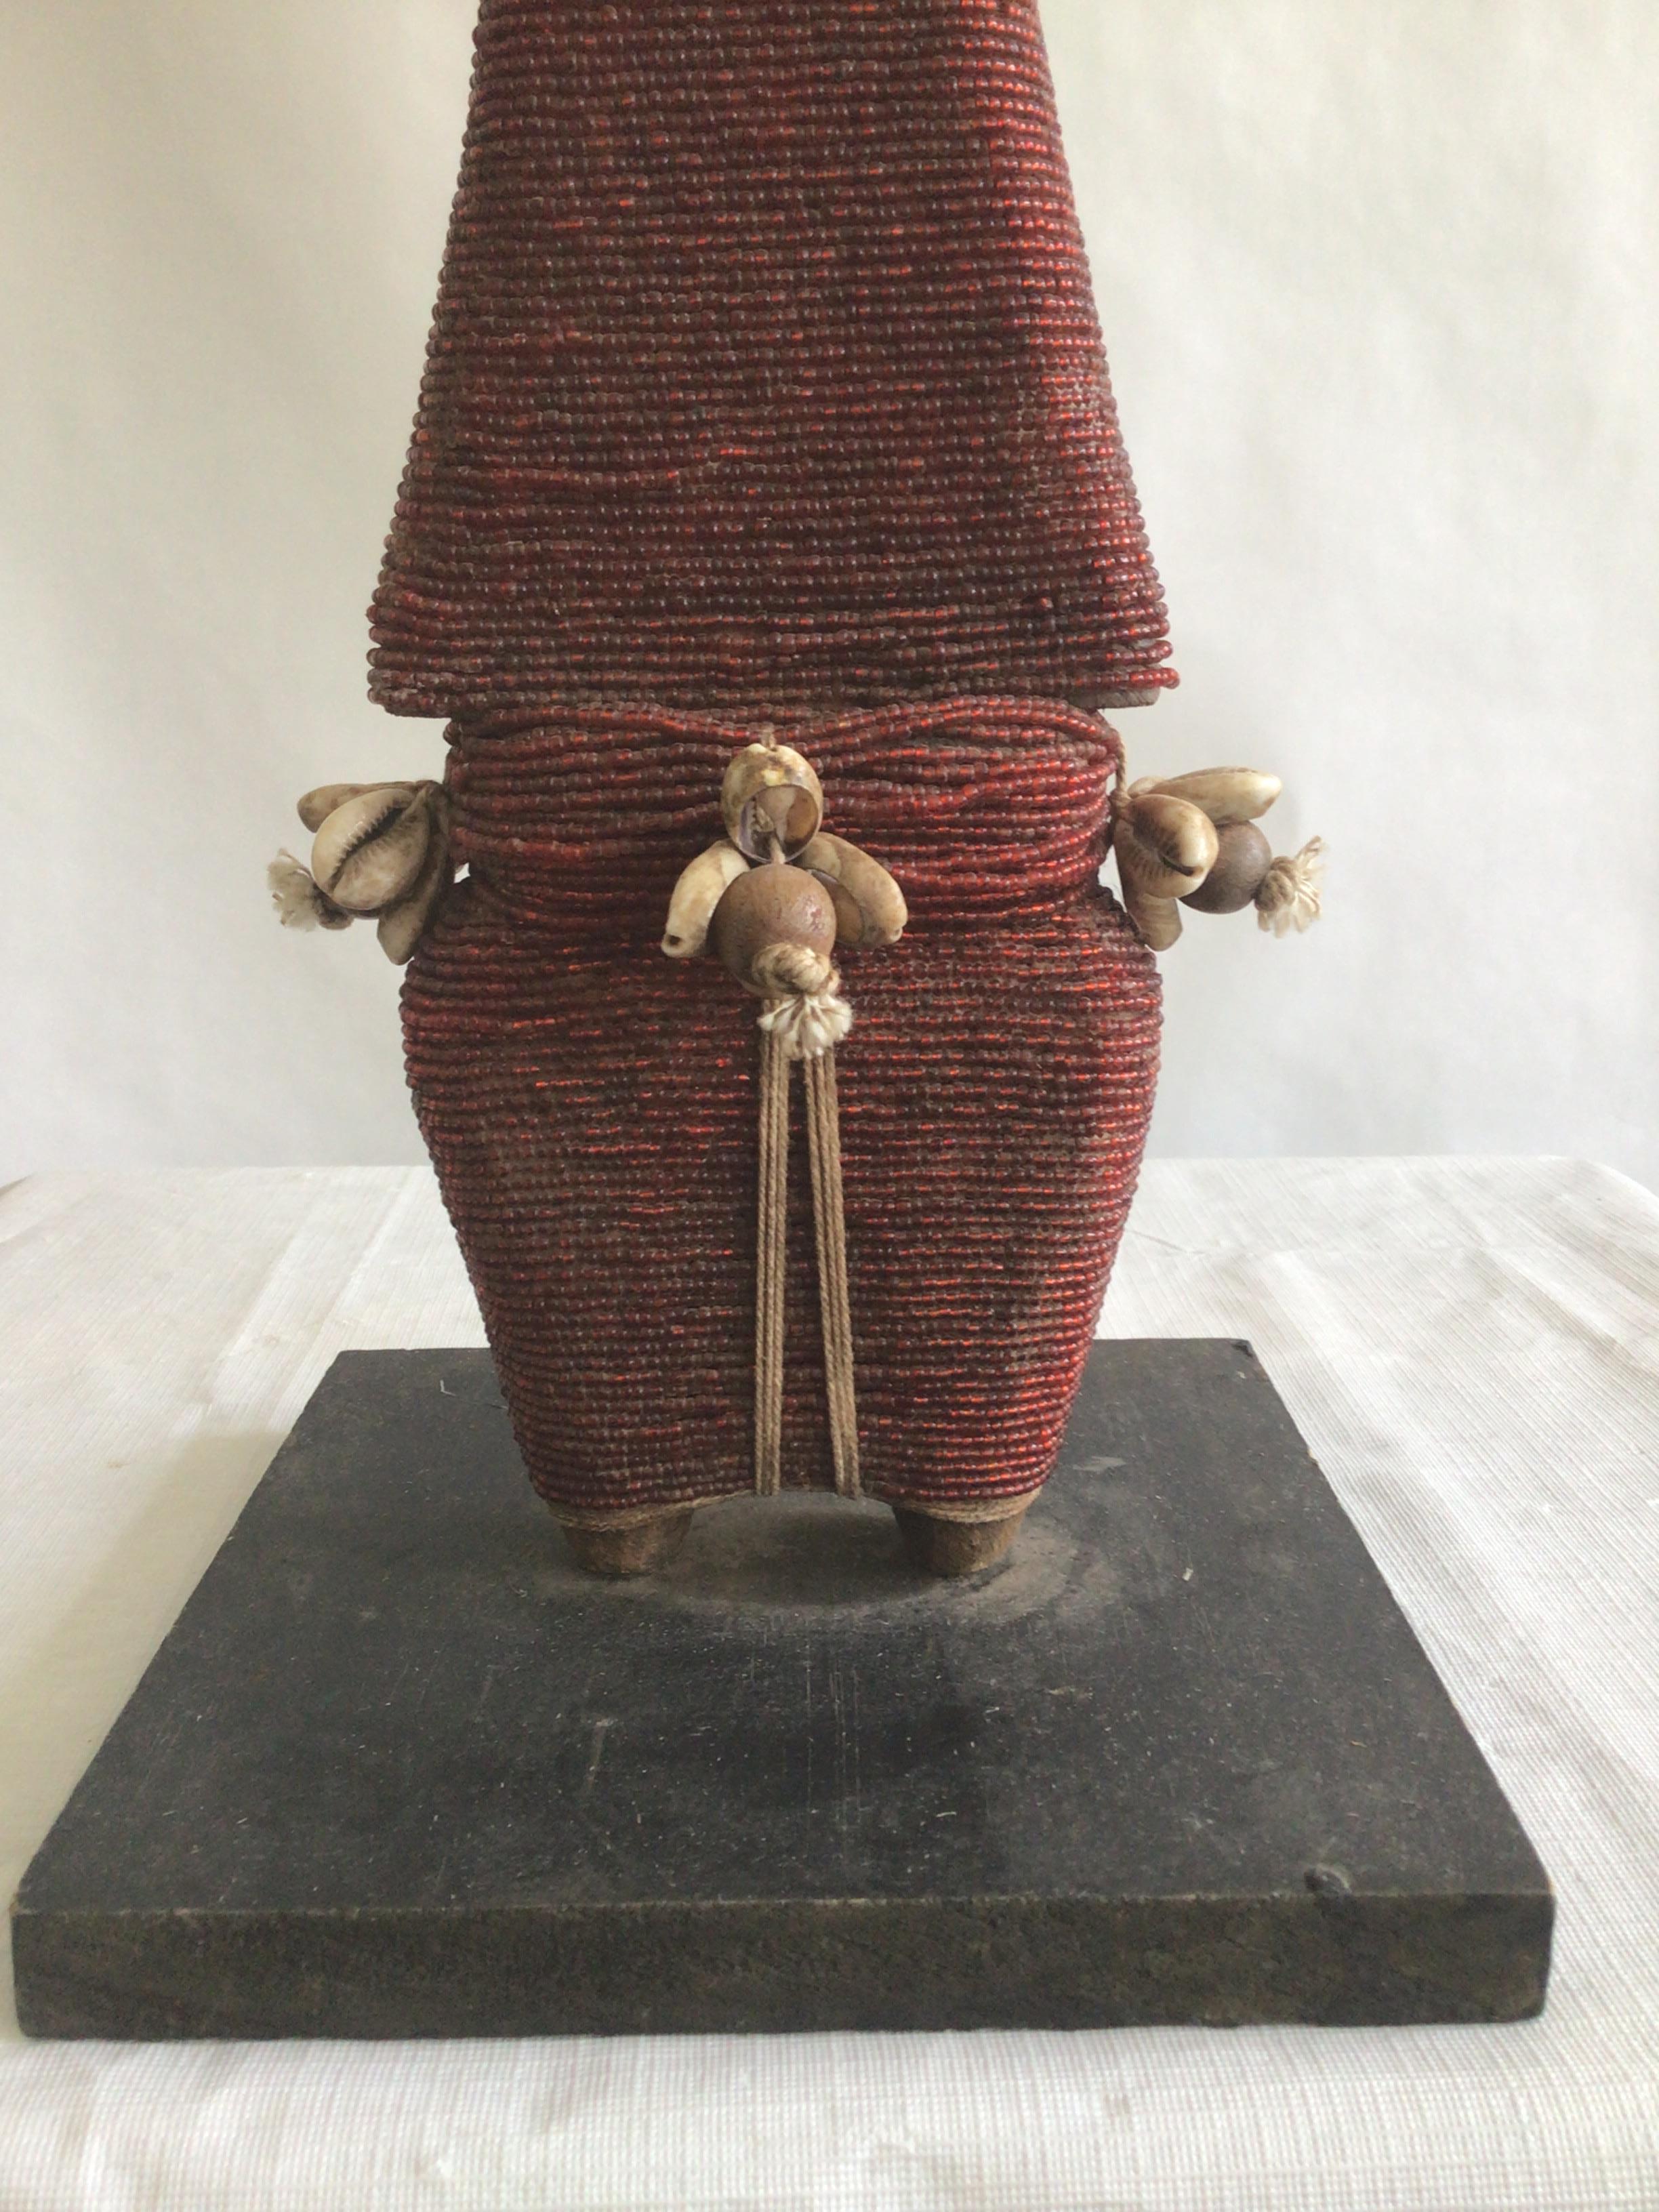 Hand-Crafted 1990s Wood and Beaded Sculpture Of Woman - NAMJI Fertility Doll For Sale